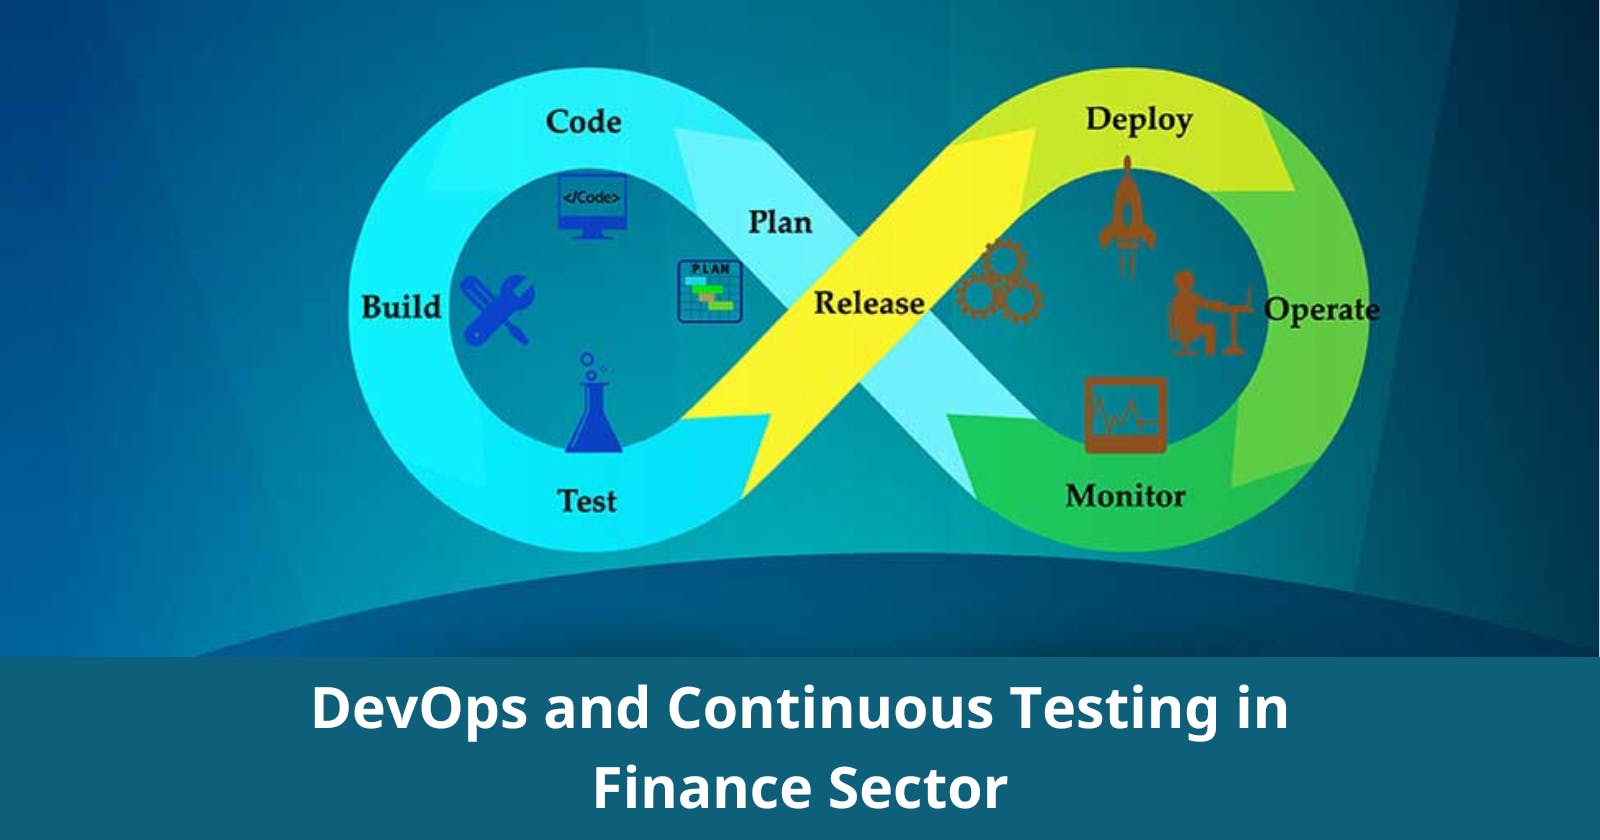 Using DevOps and Continuous Testing to Succeed in The Finance Sector